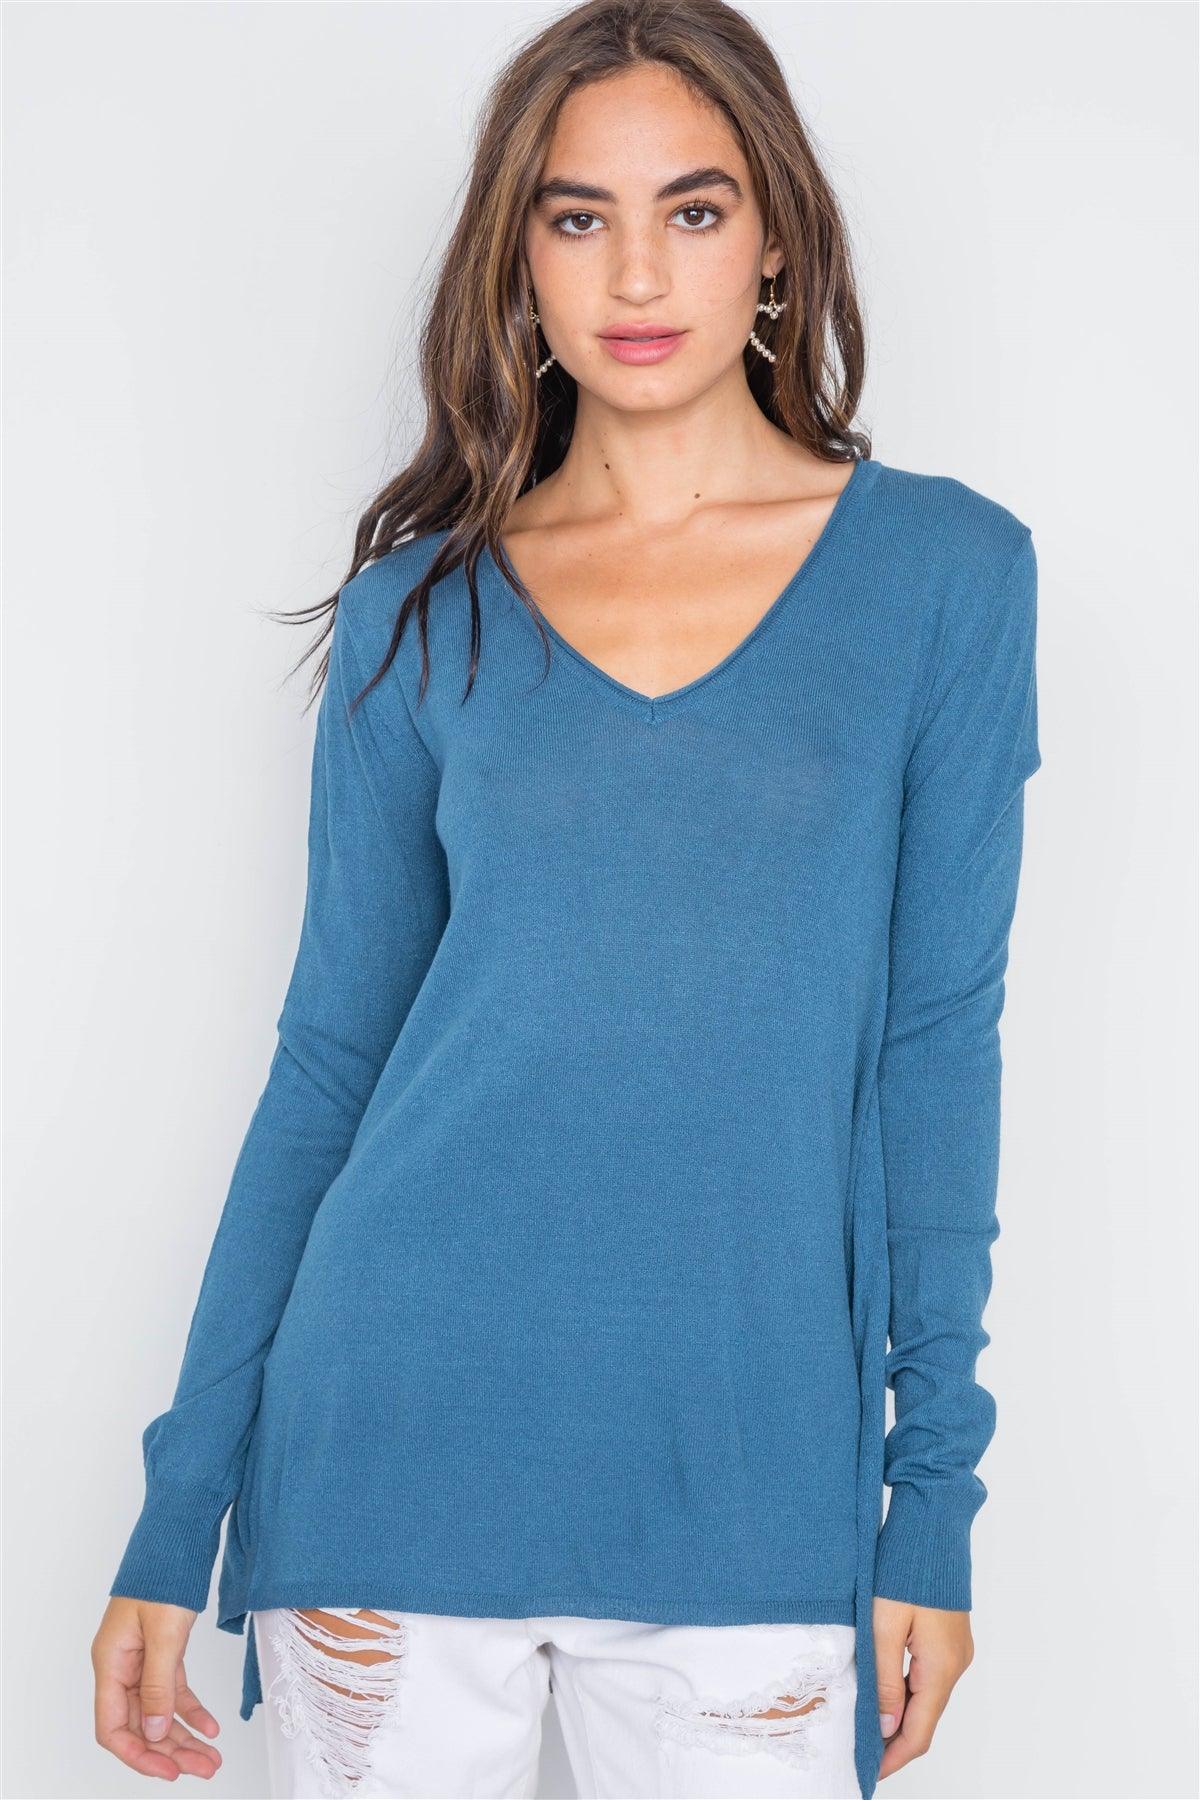 Blue Jean Knit V-Neck Casual Solid Long Sleeve Sweater /2-2-2